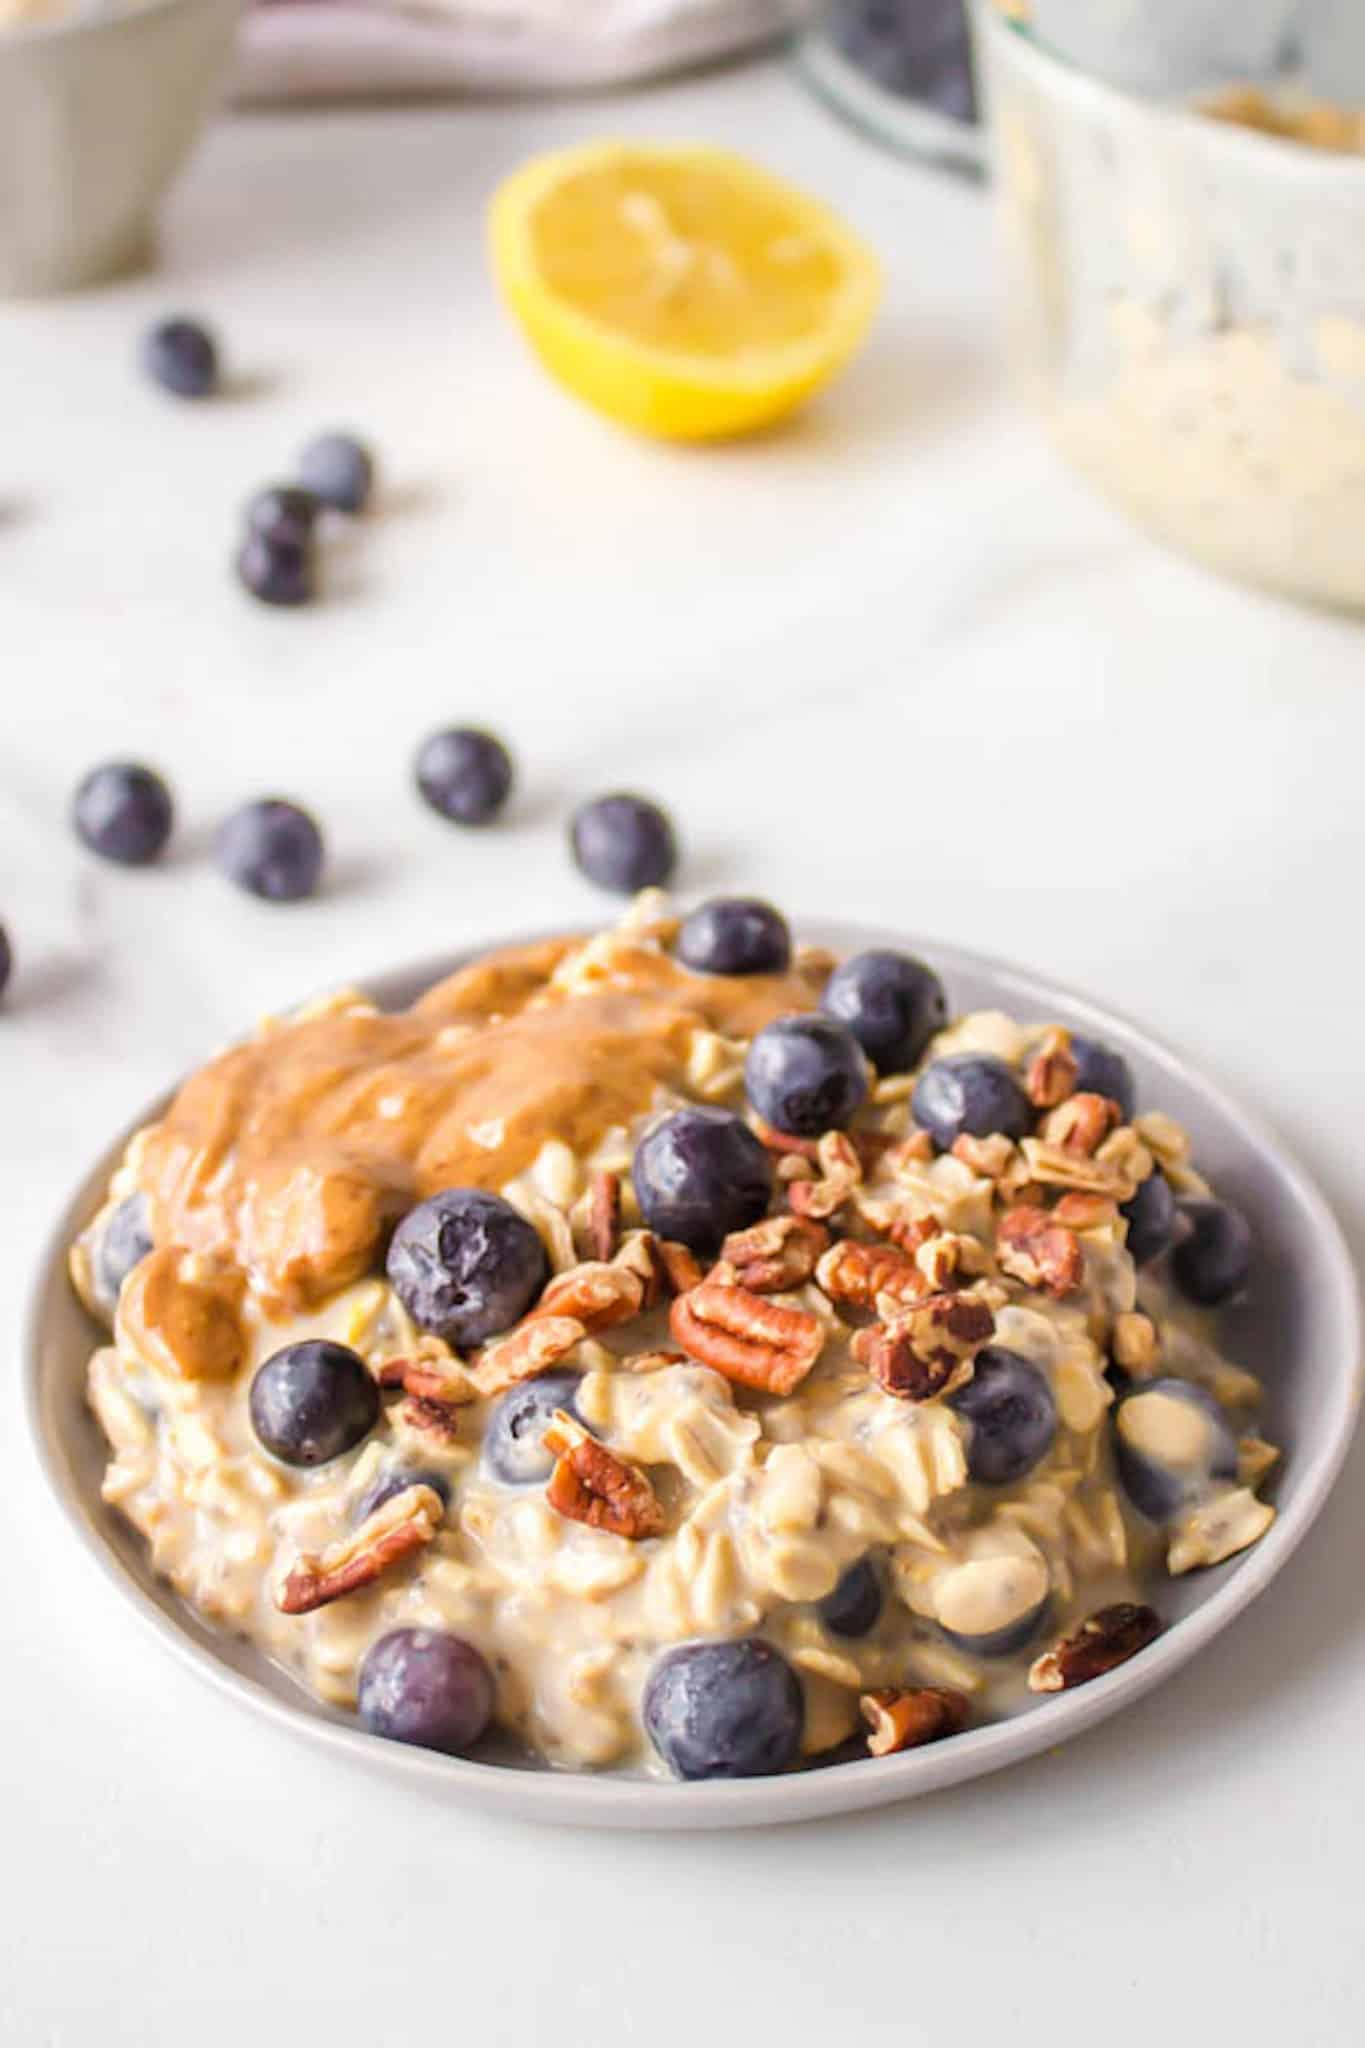 blueberry oatmeal served with nuts and nut butter.